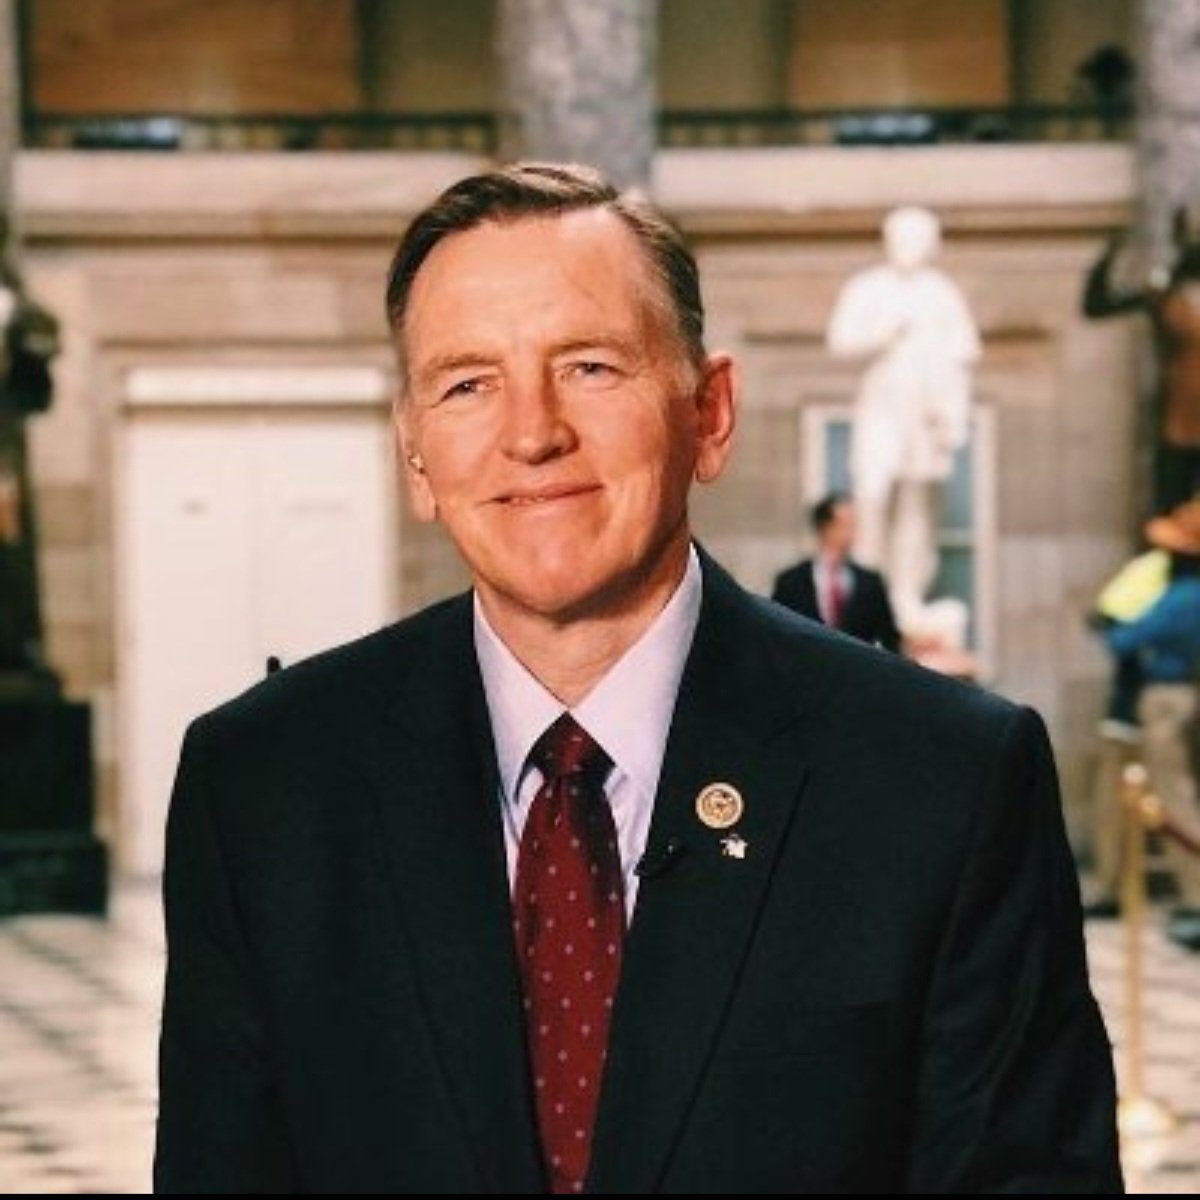 Representative Paul Gosar....
It is way past time for a reason. ?
Is it Parkinsons ?
Is it DRUG use, illegal ?
Is it Tardive Dyskinesia-from anti-depressant use ?
You won't talk, so WE WILL SPECULATE DRUG USE.
#PaulGosar